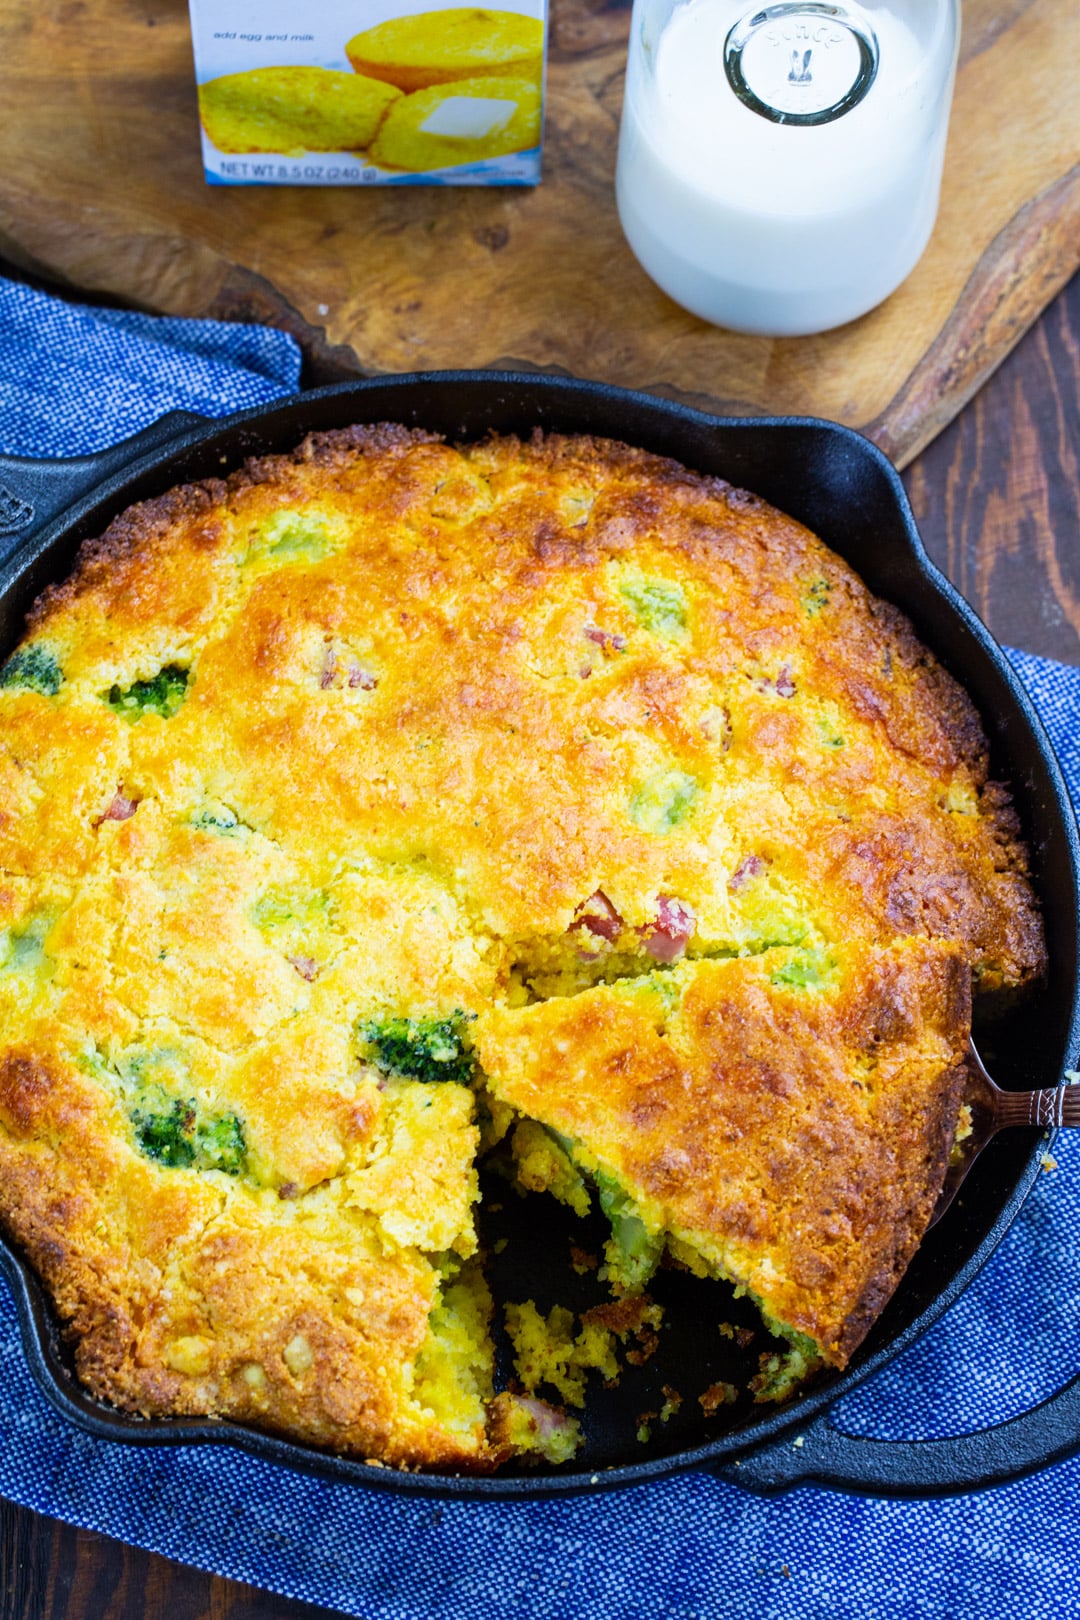 Cornbread in a skillet with slice removed.